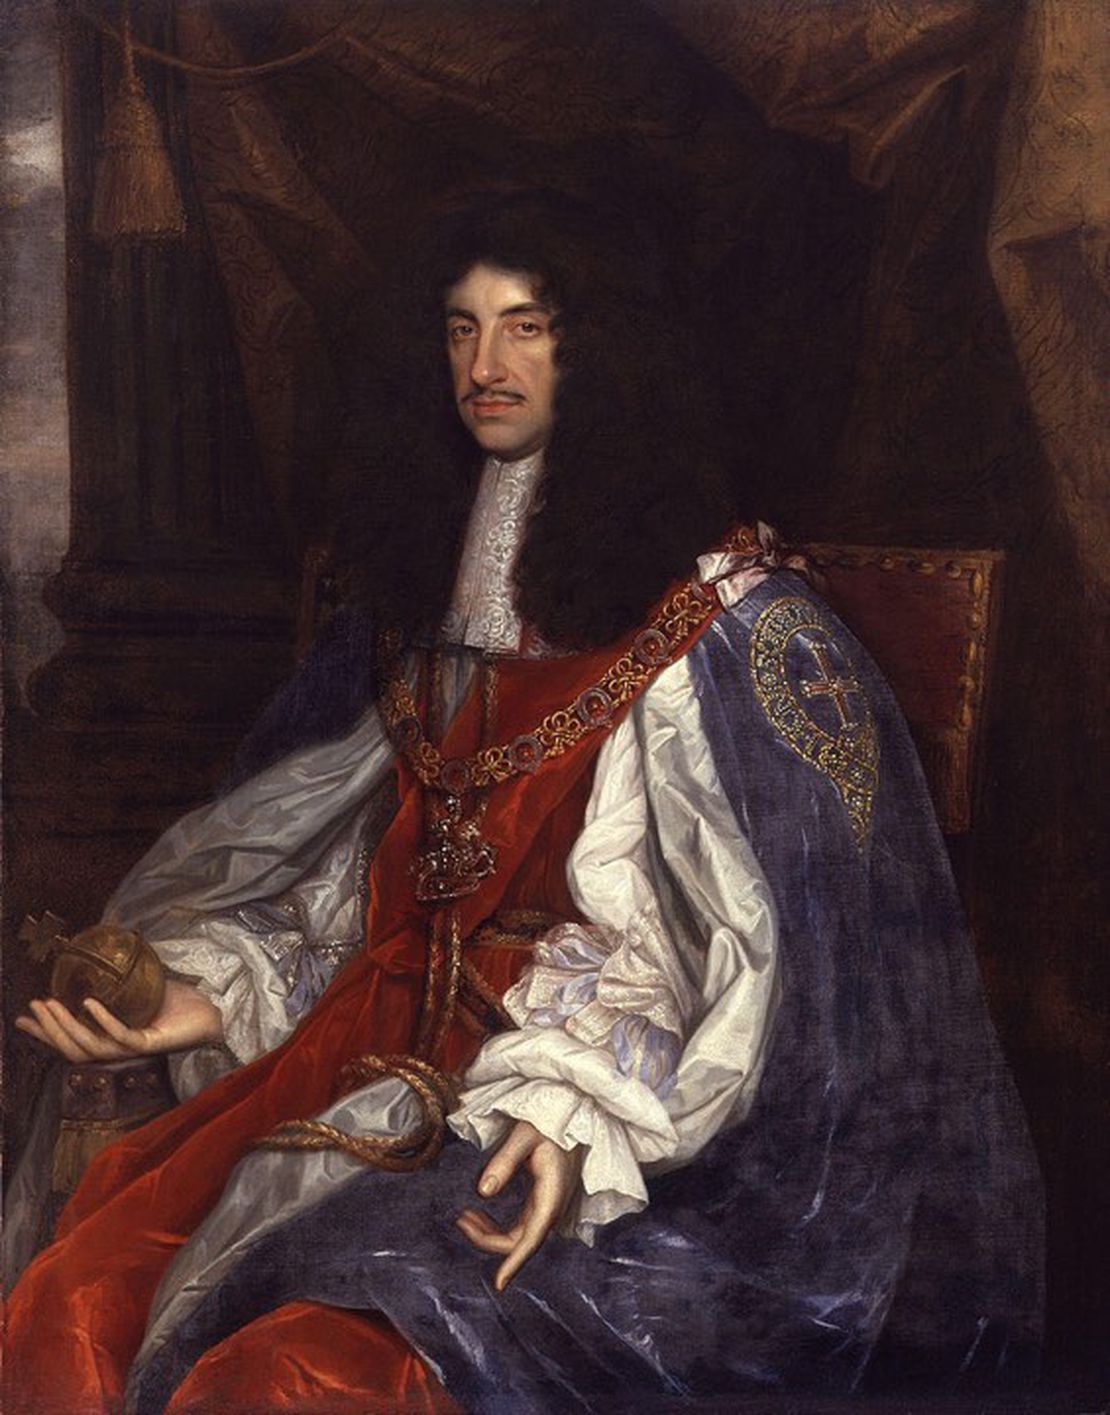 King Charles II, the merry monarch died